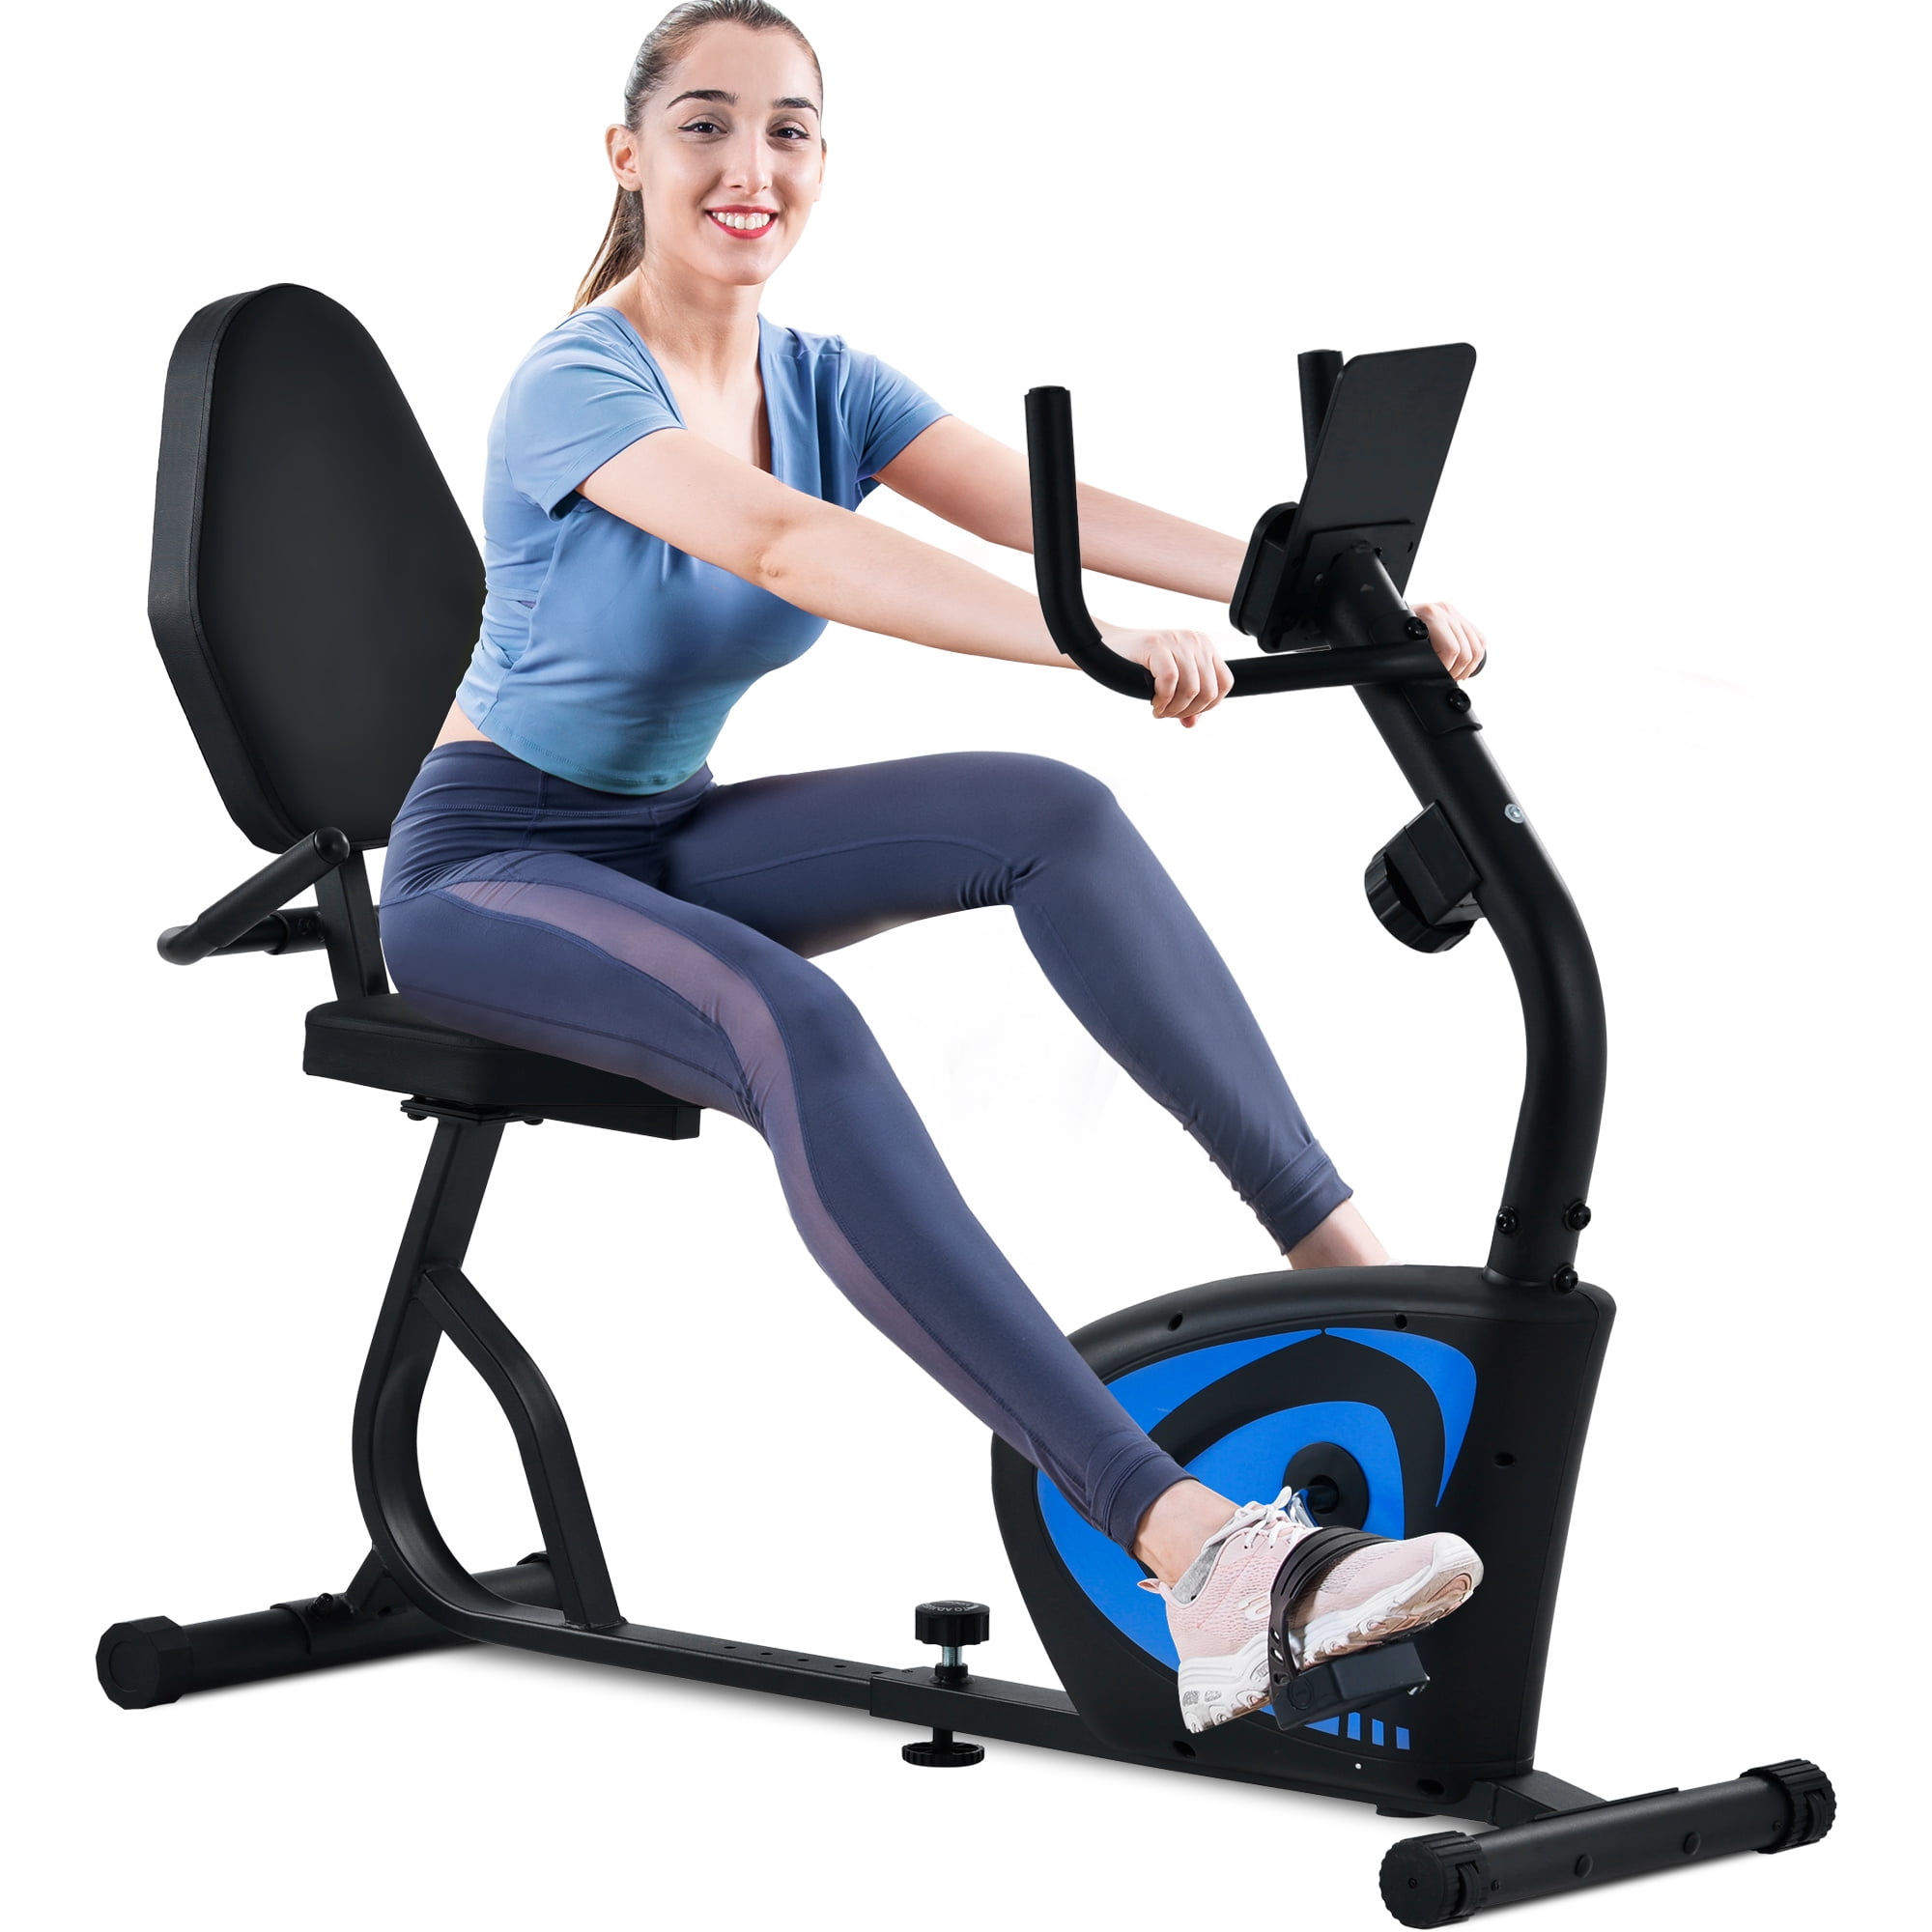 Blue Cycool Recumbent Exercise Bike,Indoor Magnetic Cycling Stationary bike with Monitor,Adjustable Cushion for Adults Seniors Workout 